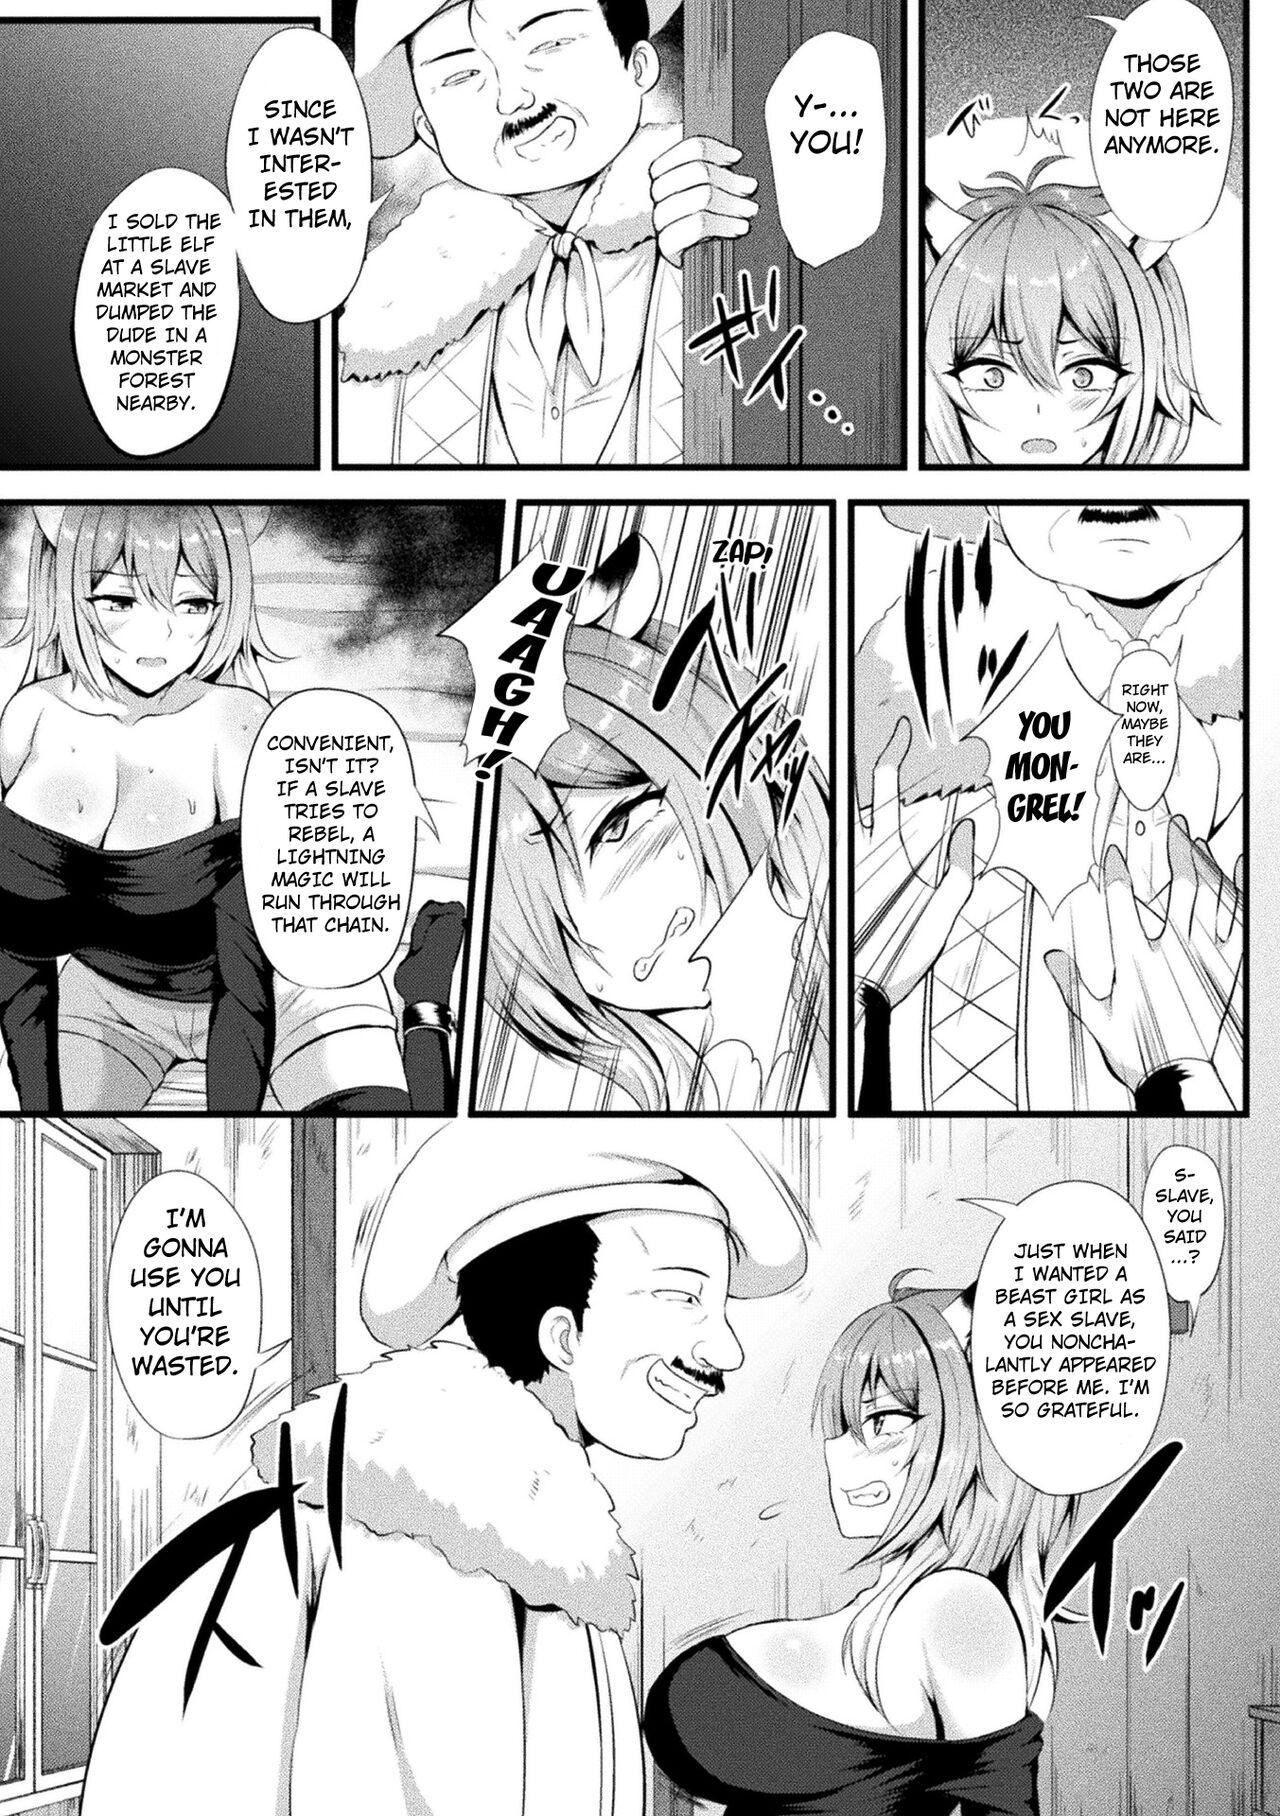 Camgirl The Captived Beast Girl. Forced Climax by a Slime. Wank - Page 5